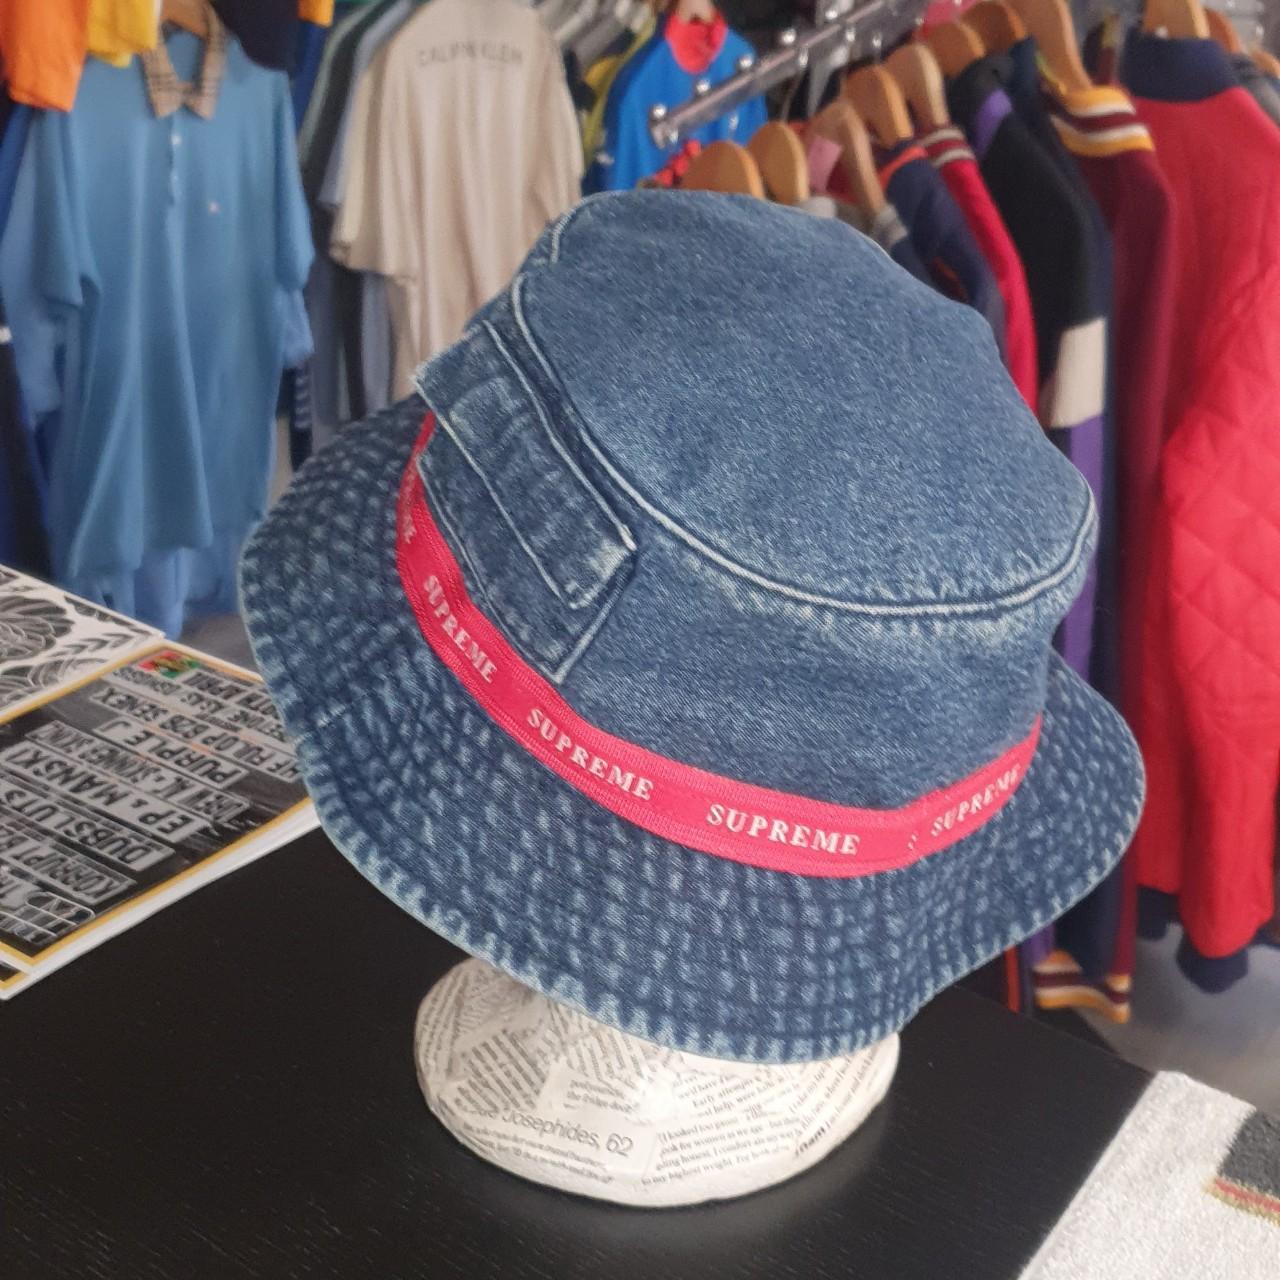 Supreme Men's Blue and Red Hat (3)